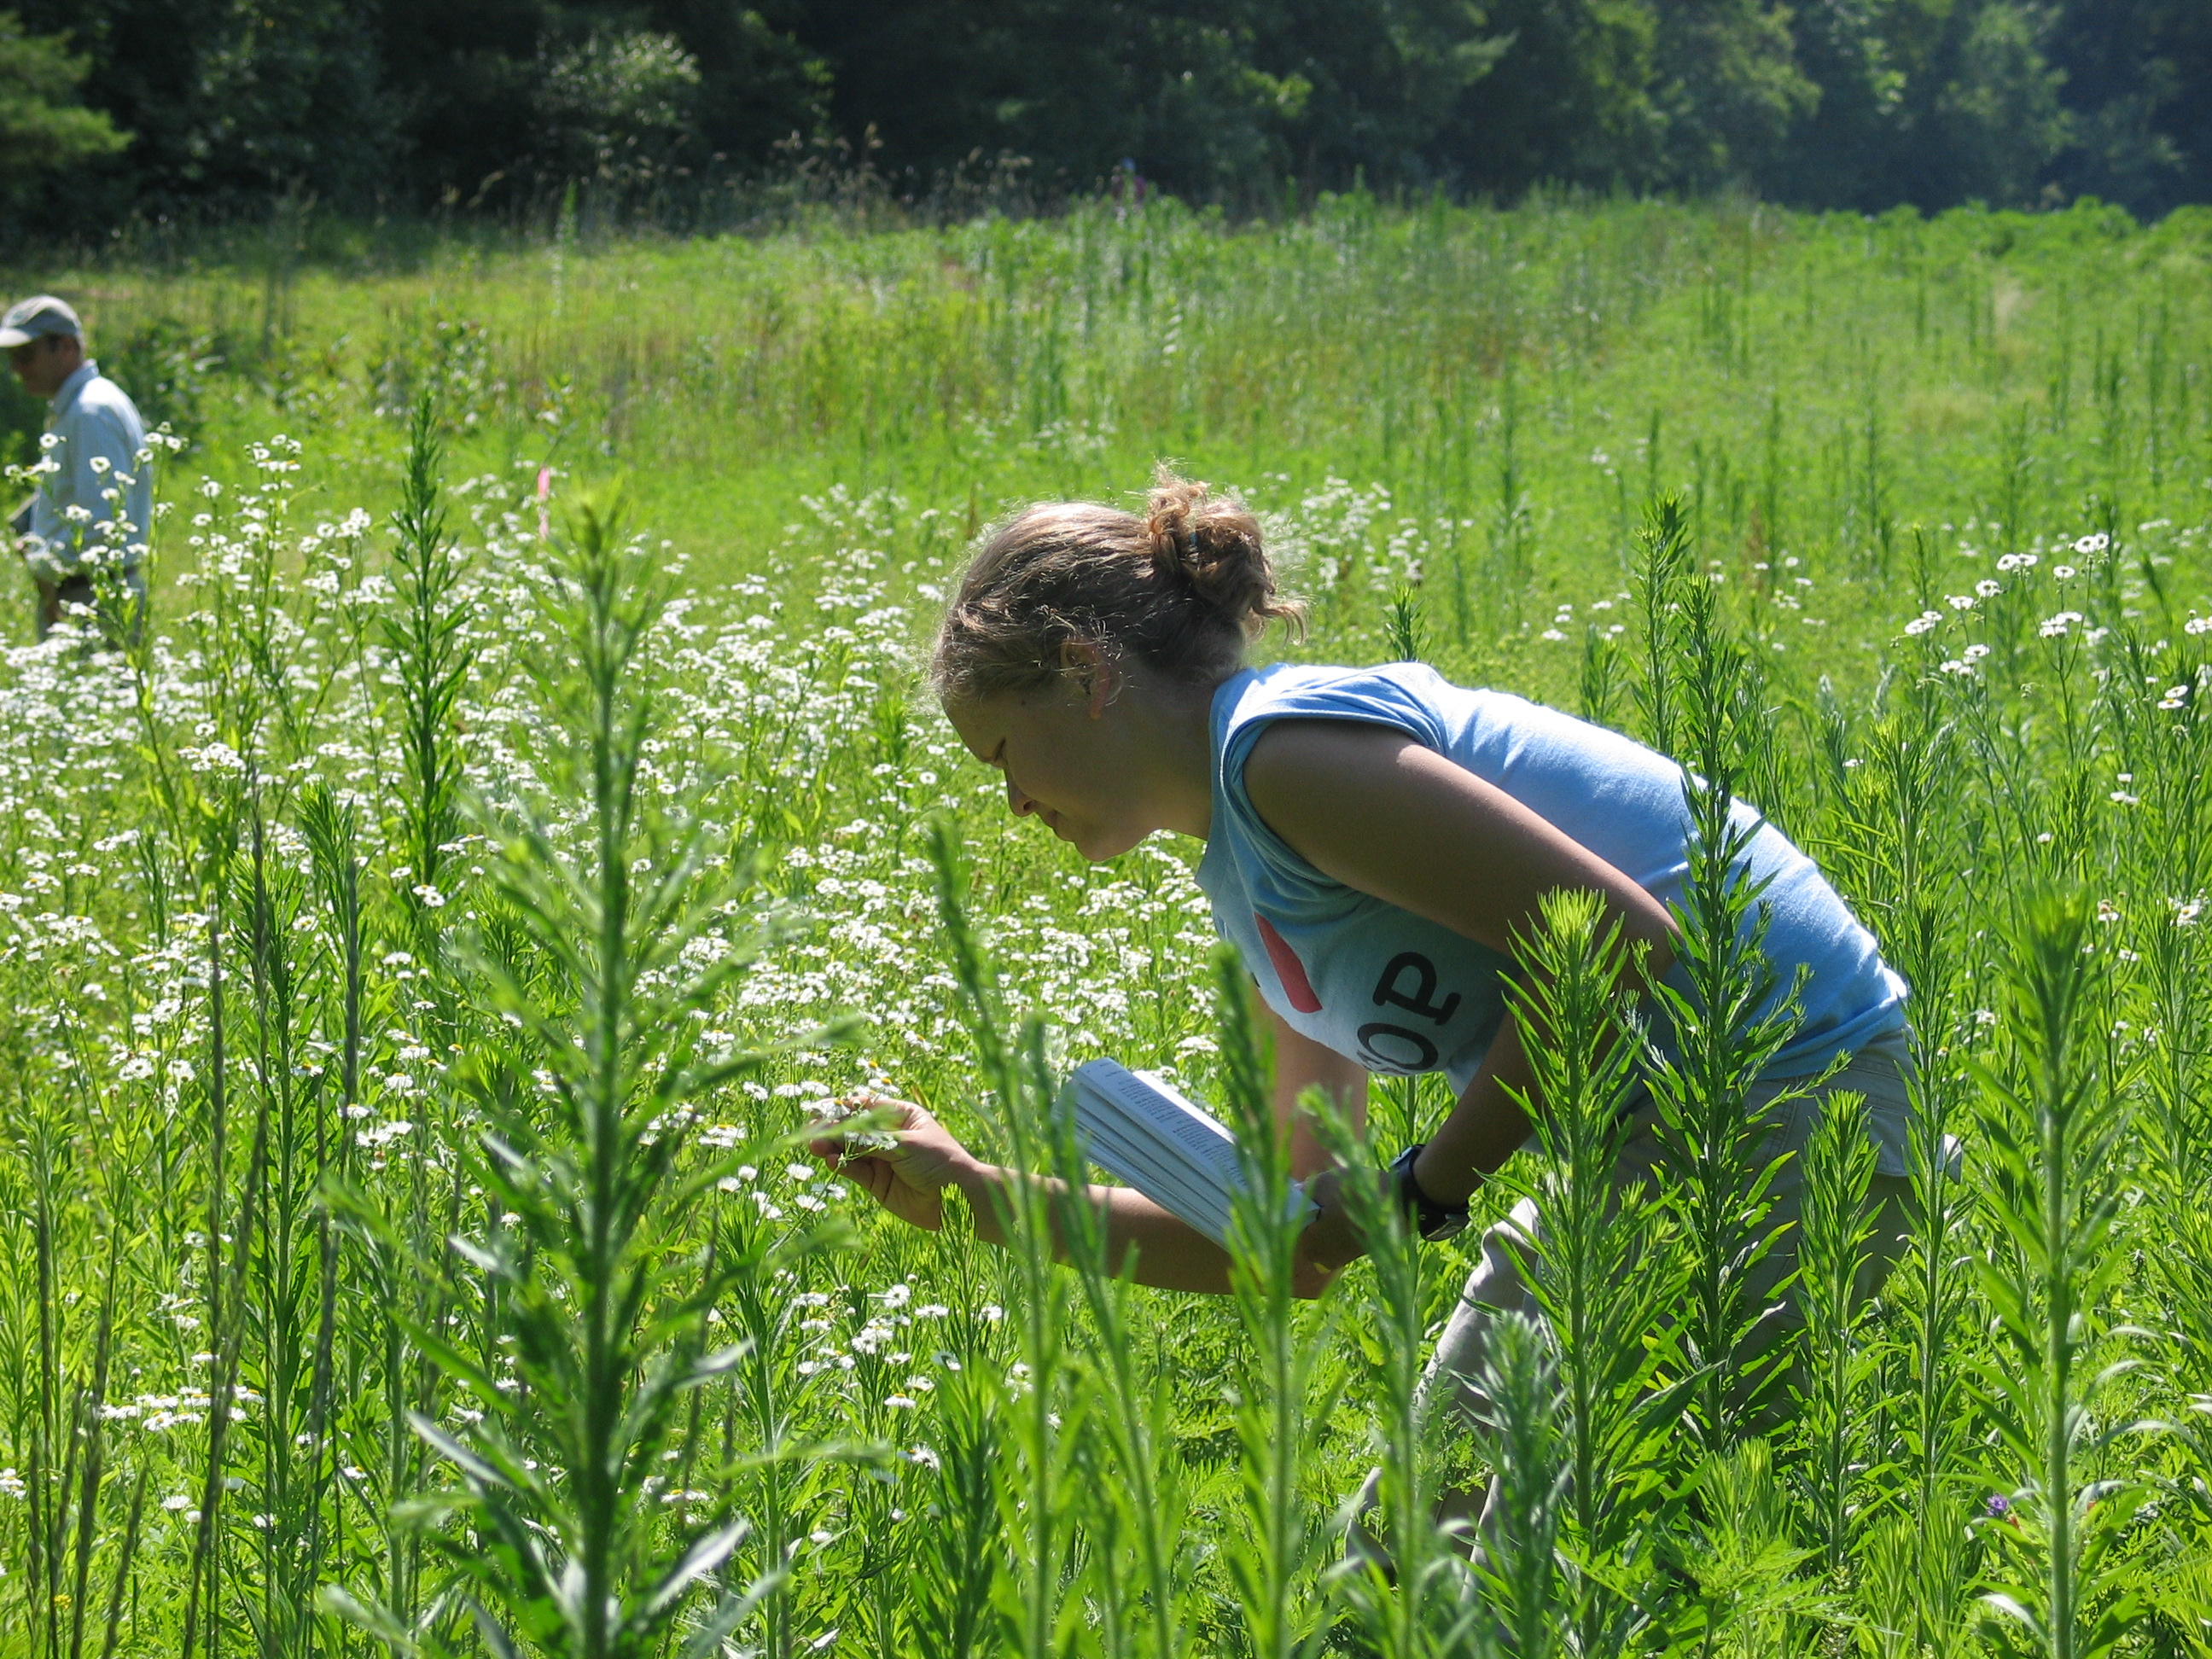 A woman examines flowers in a field, recording her observations